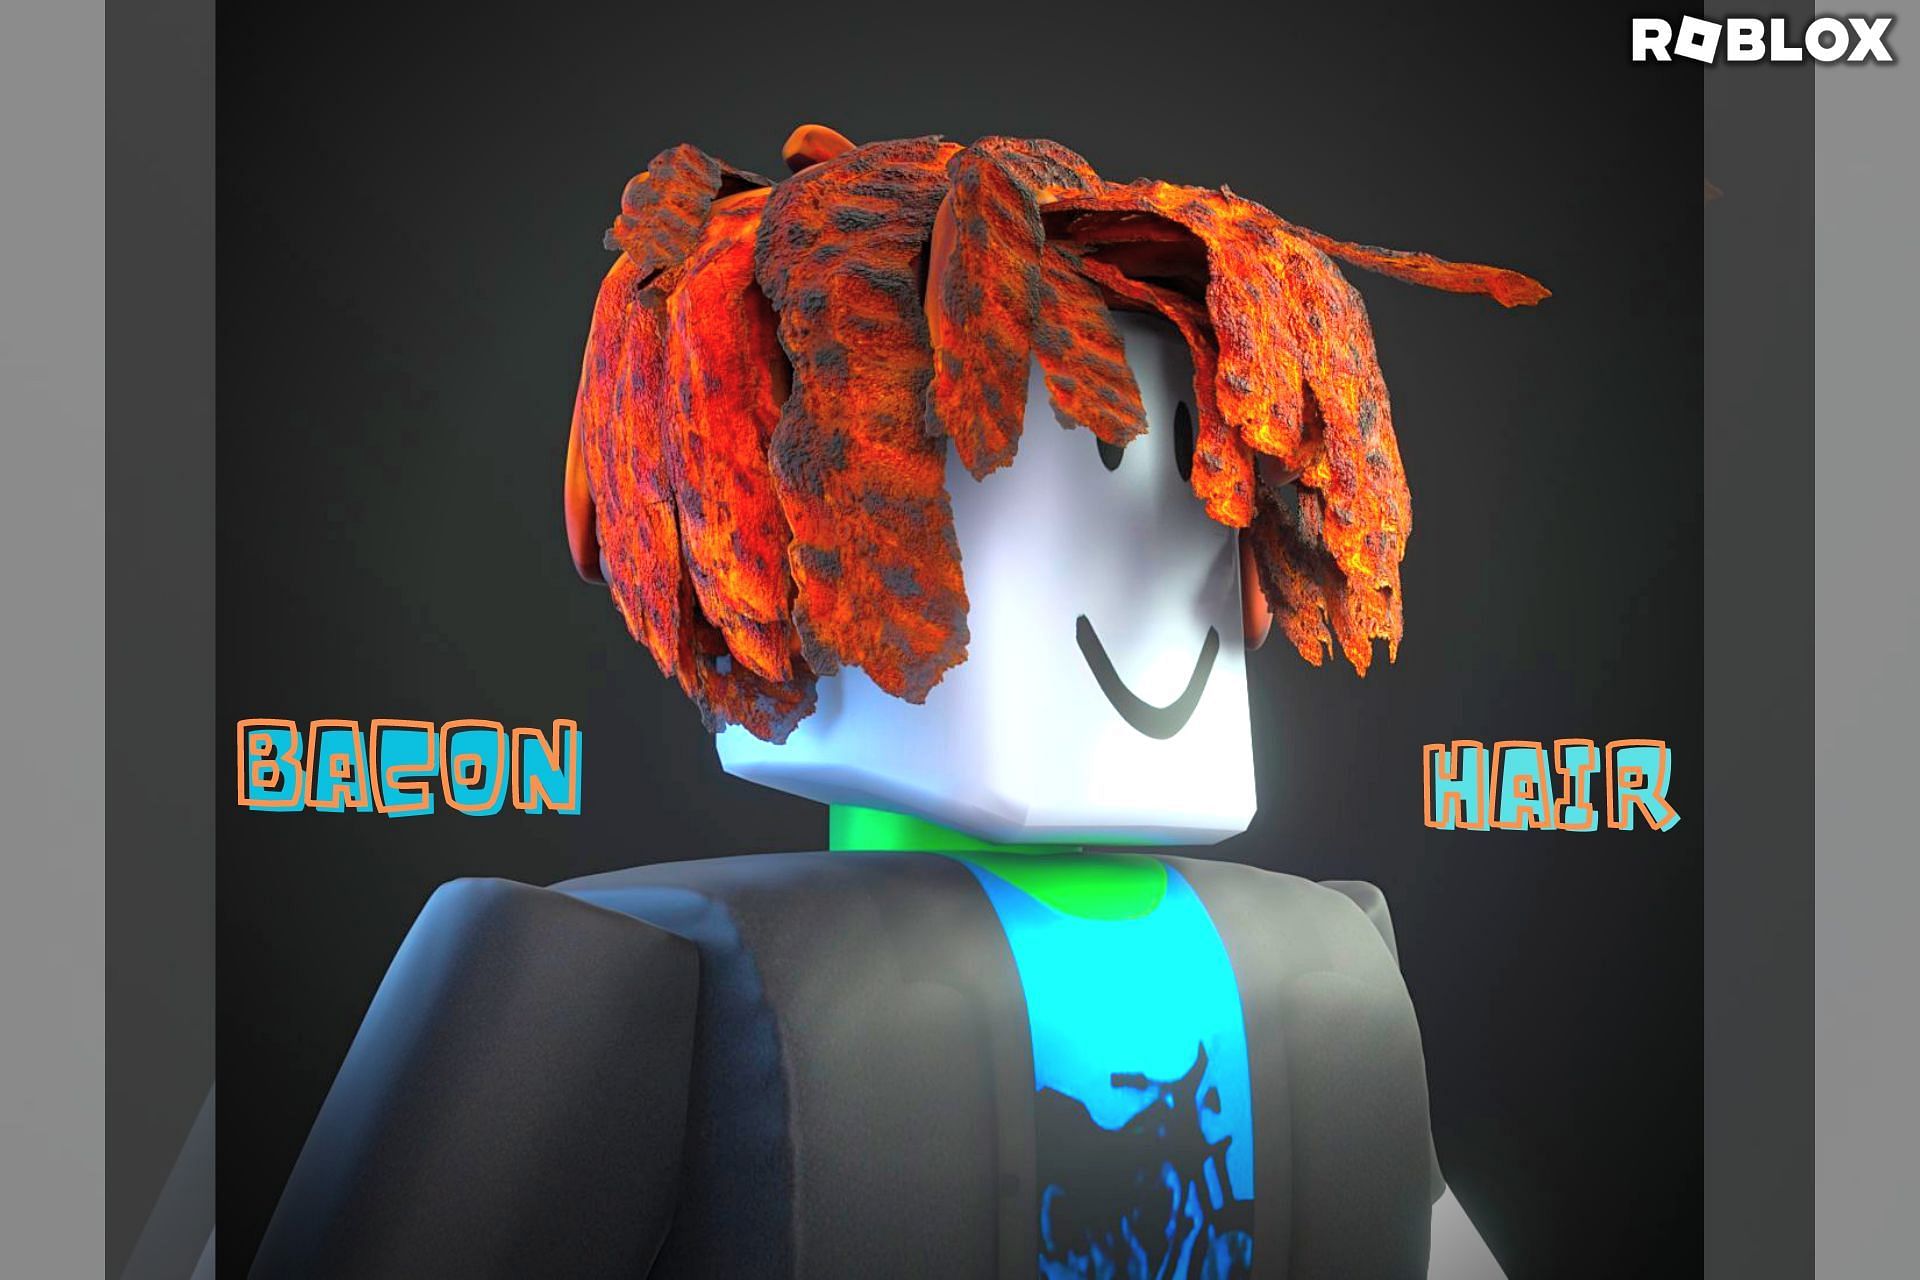 Roblox is making a big change to the default skin (bacon hair